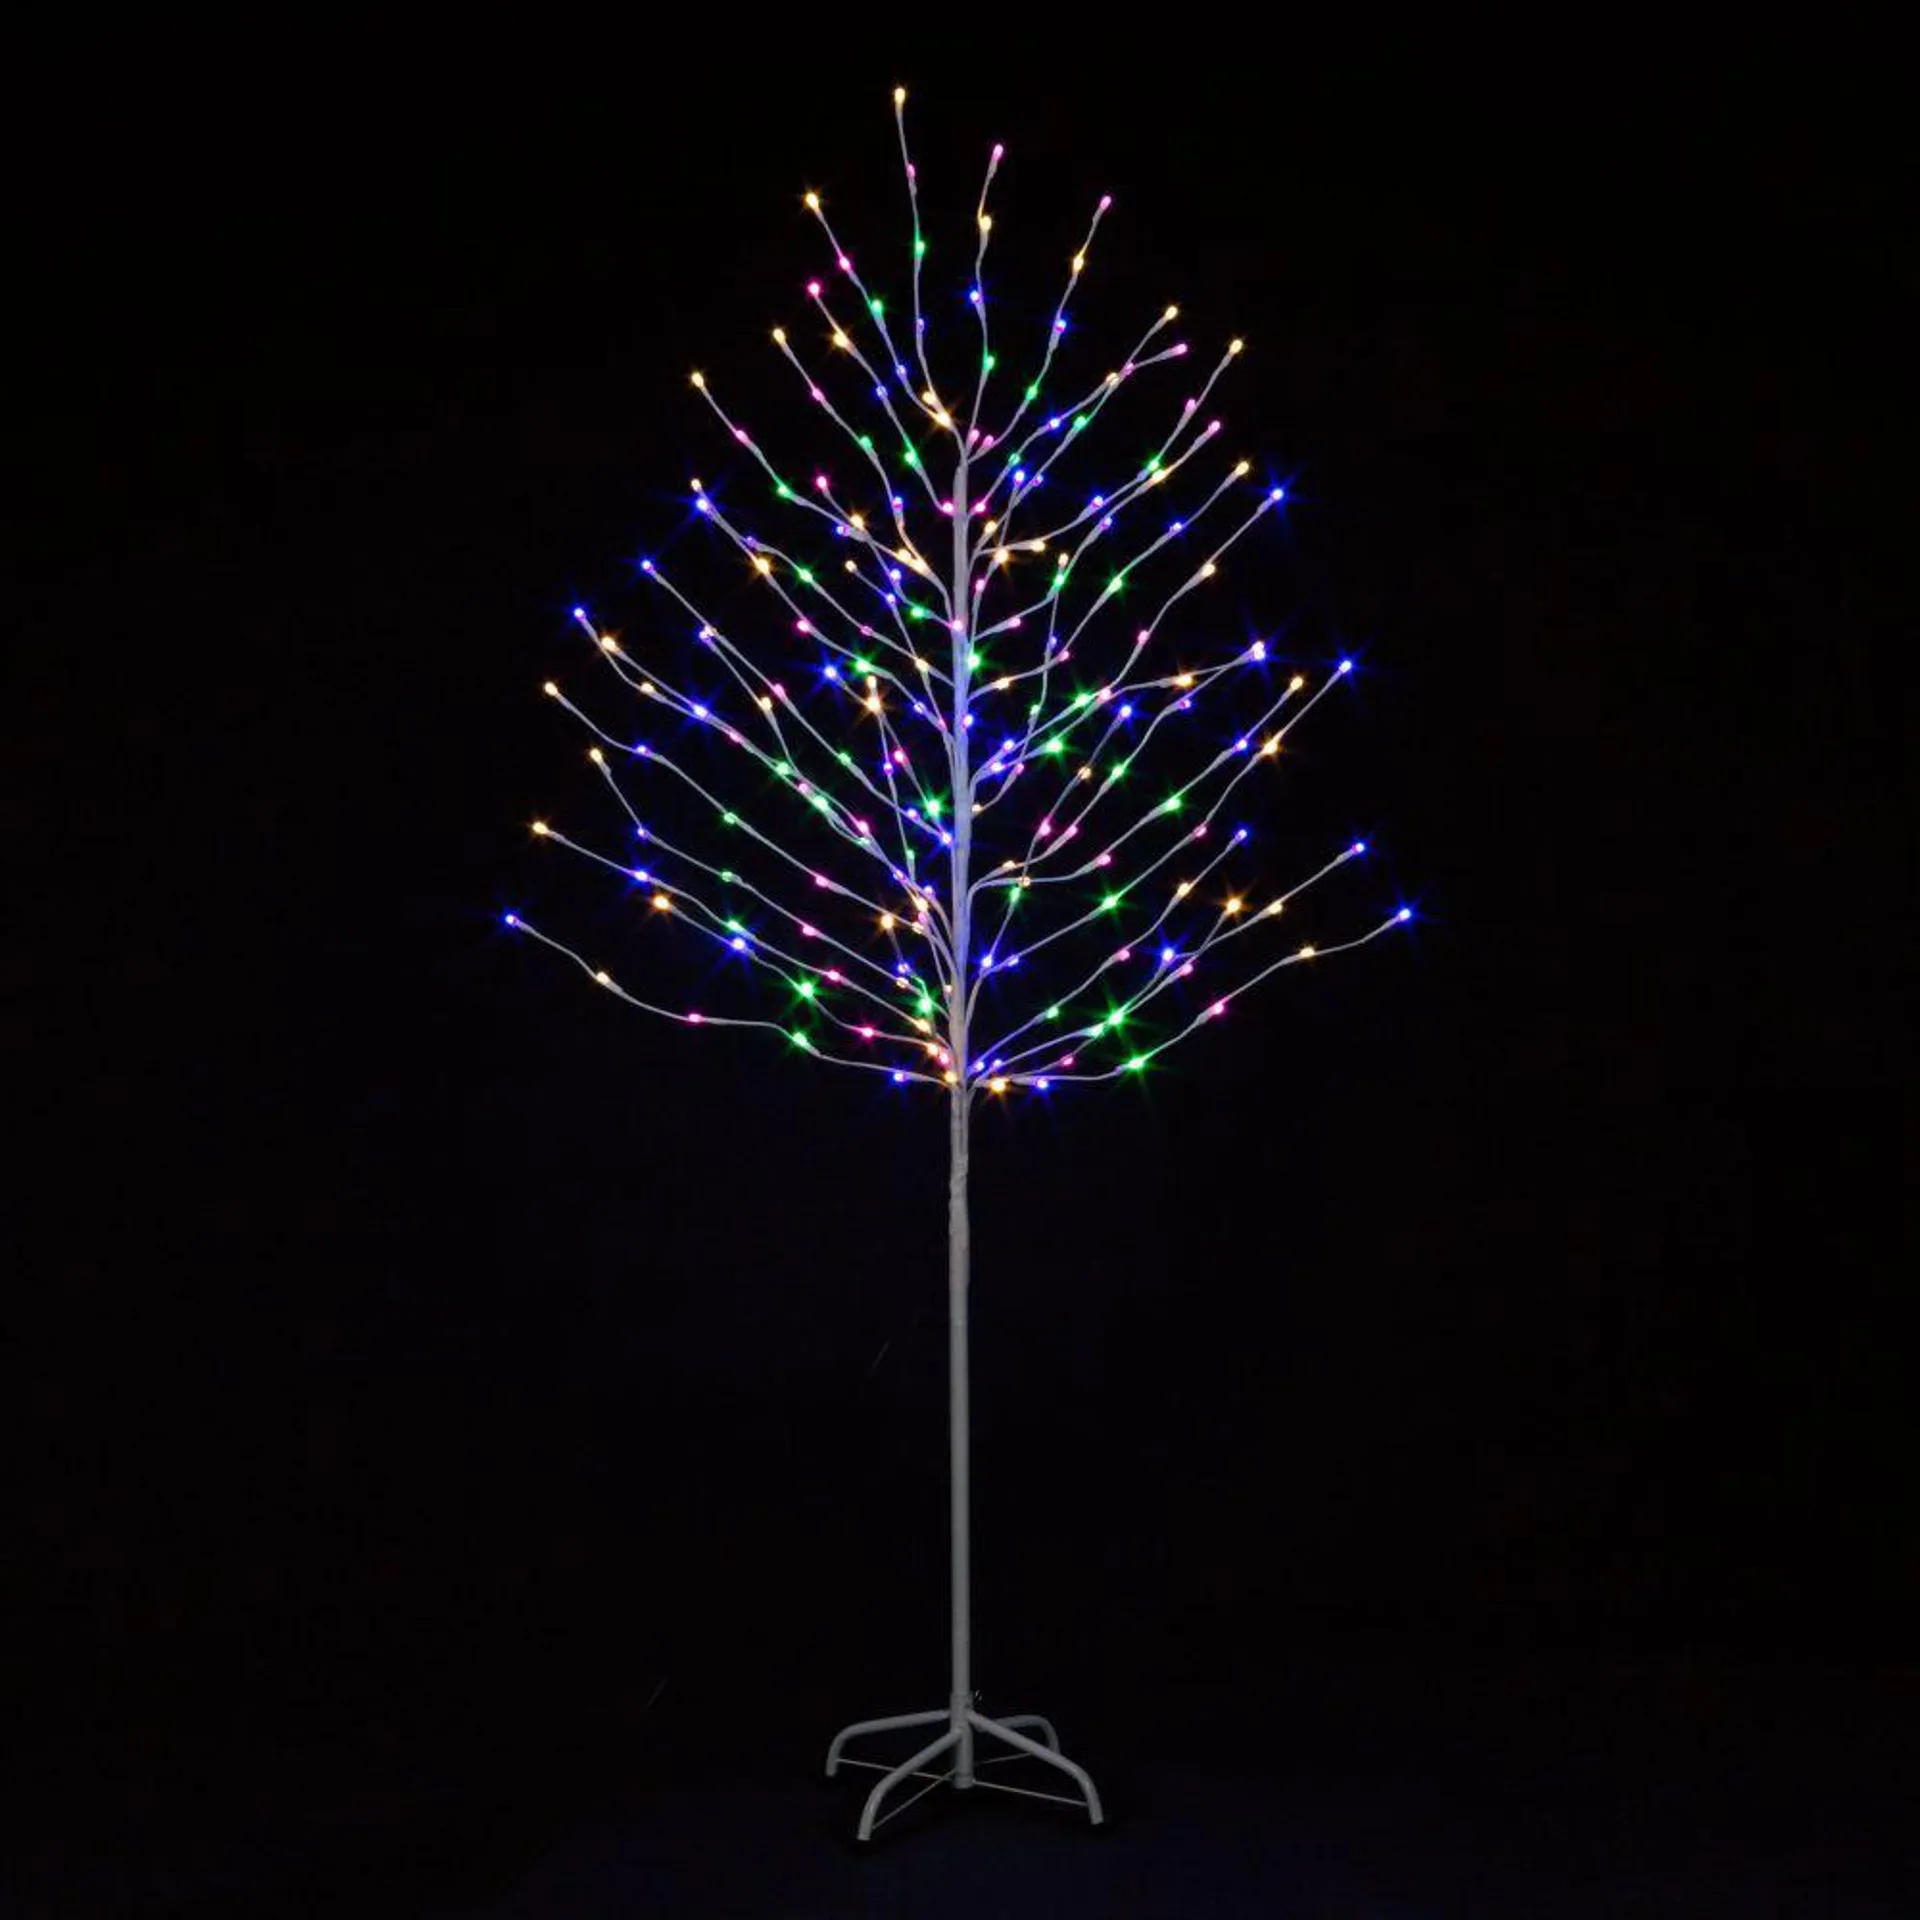 Rainbow Christmas Tree with Pink, Warm white, Blue & Green LEDs